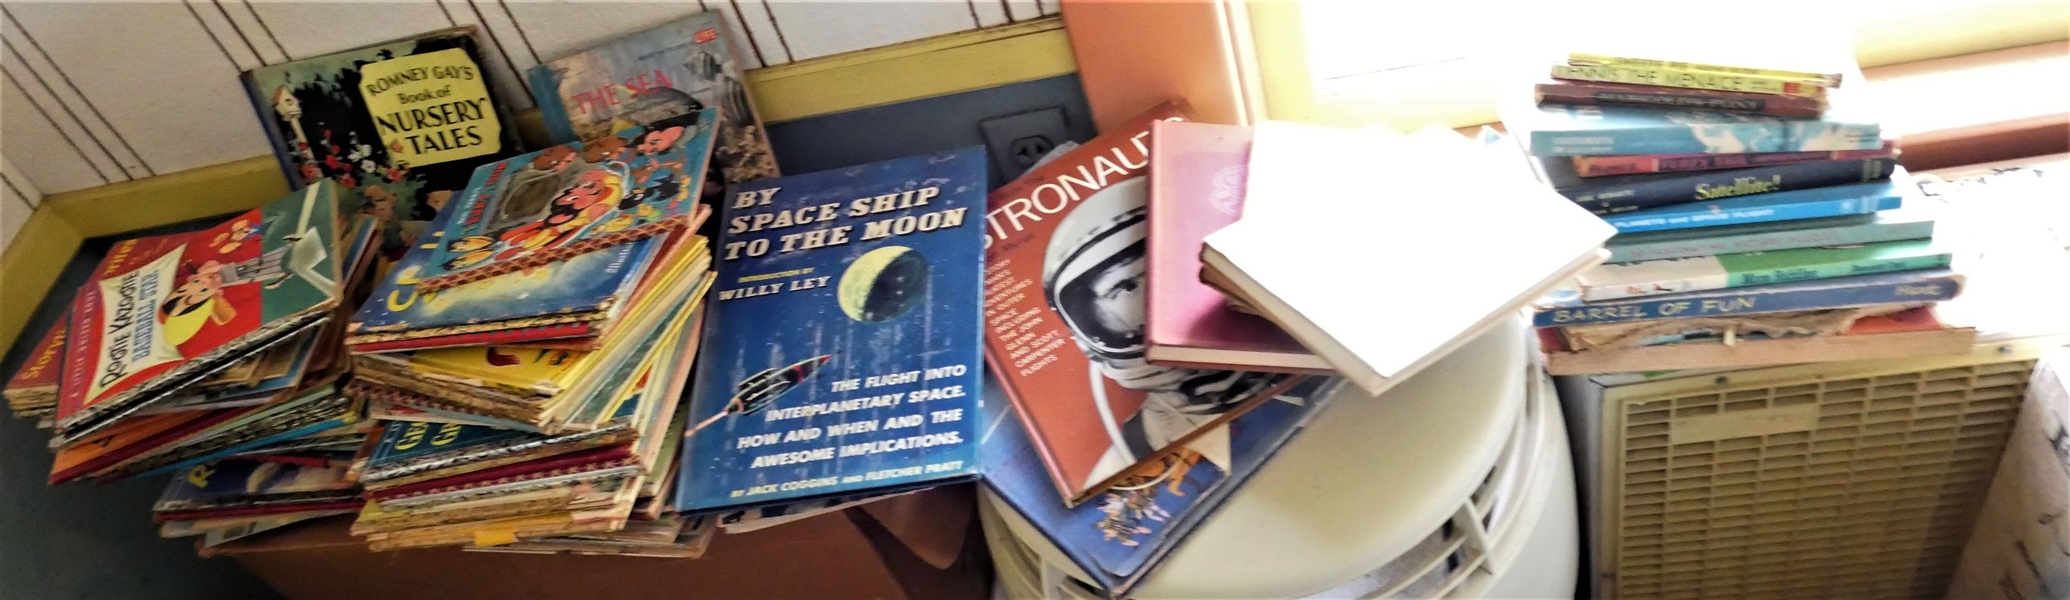 Large Group of Childrens Books including Space Books, Golden Books, Satellite, Barrel of Fun, Mrs. Coverletts Magicians, By Space Ship to the Moon, Romney Gays Book of Nursery Tales, Astronauts,...